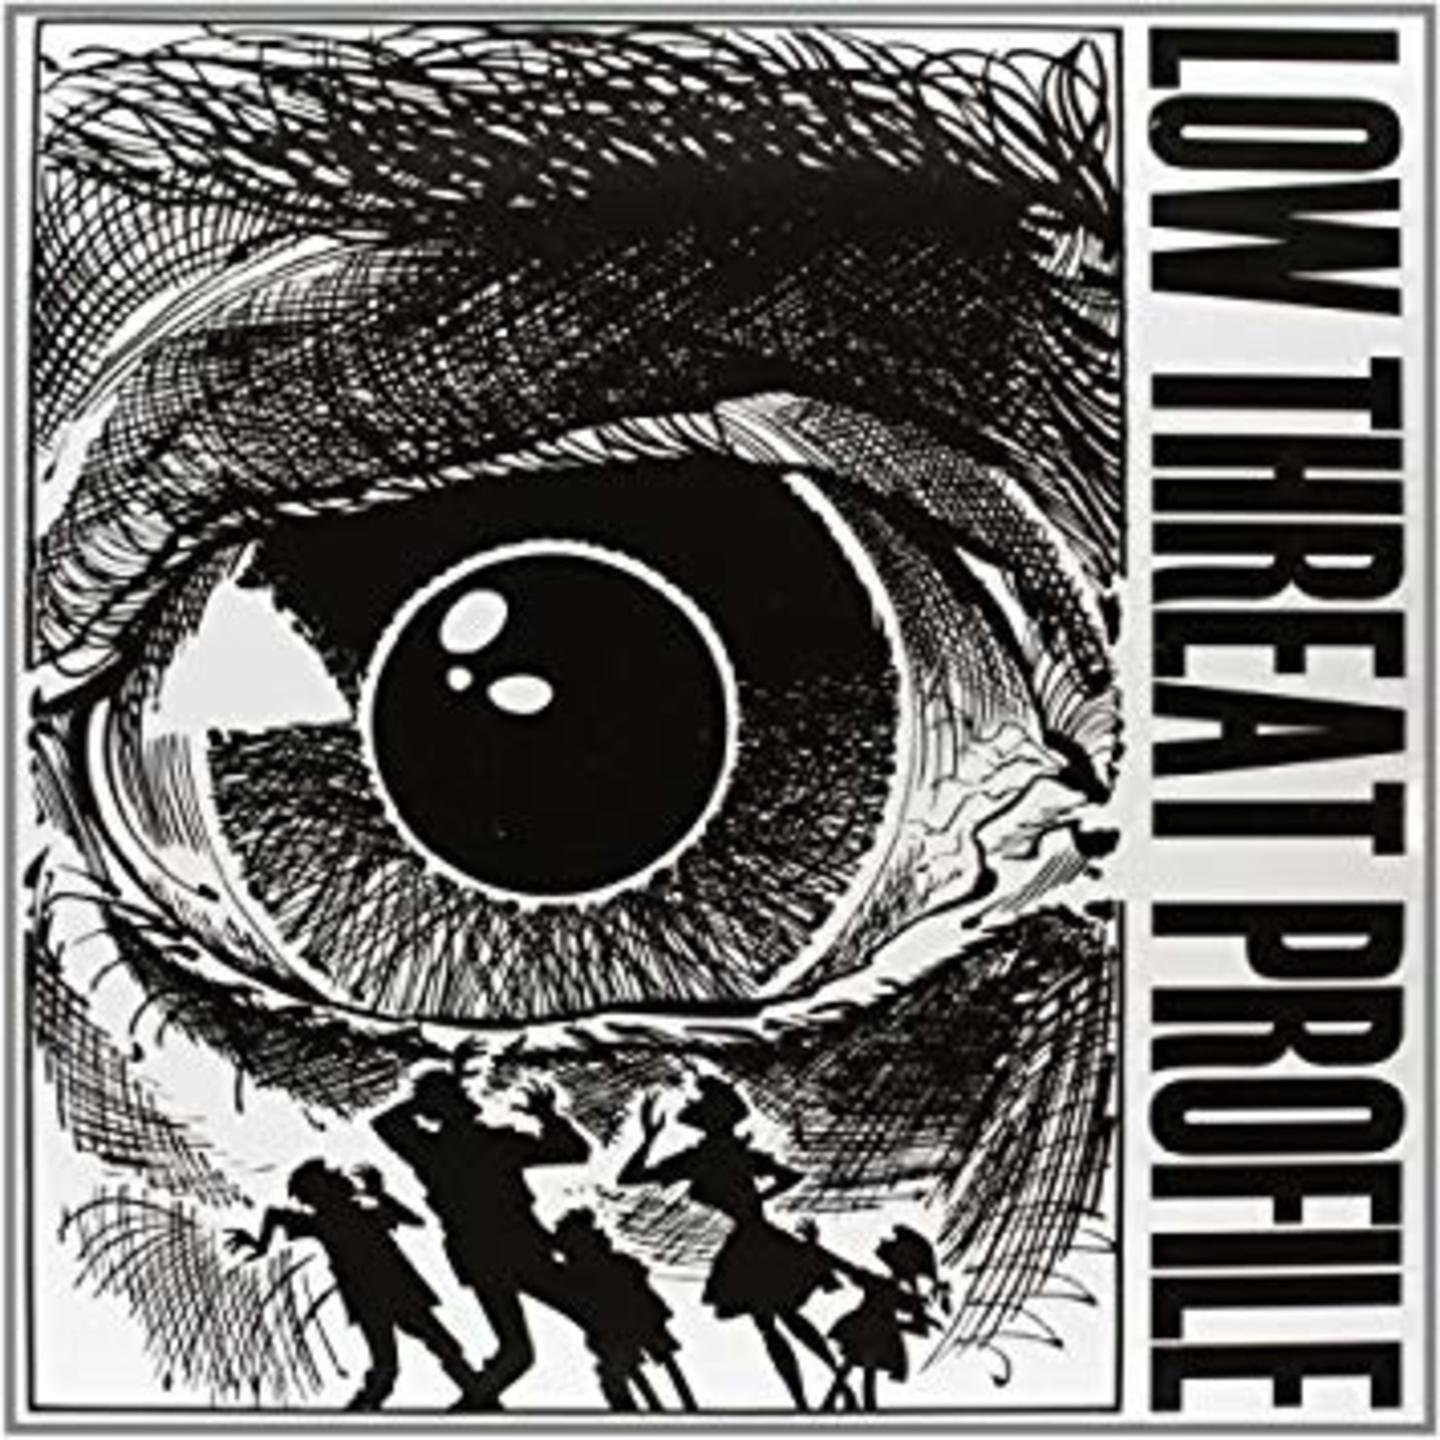 LOW THREAT PROFILE - Product Number Two LP